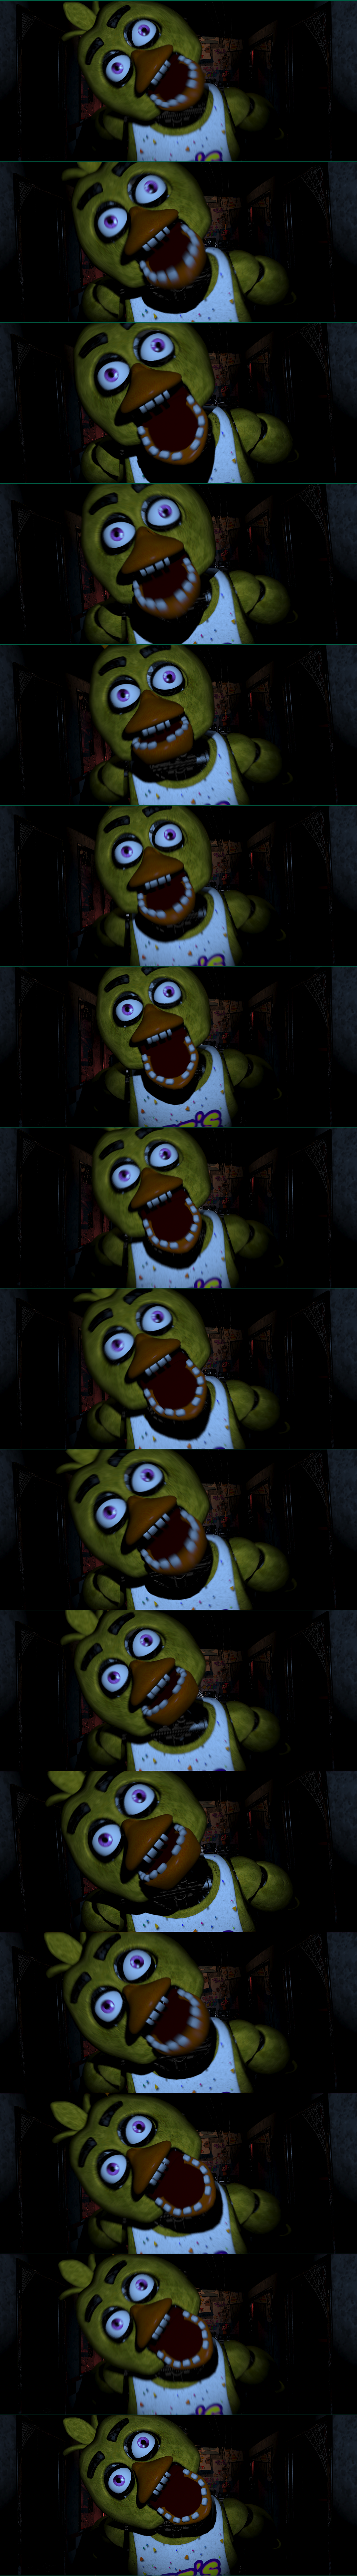 Five Nights at Freddy's - Chica Jumpscare